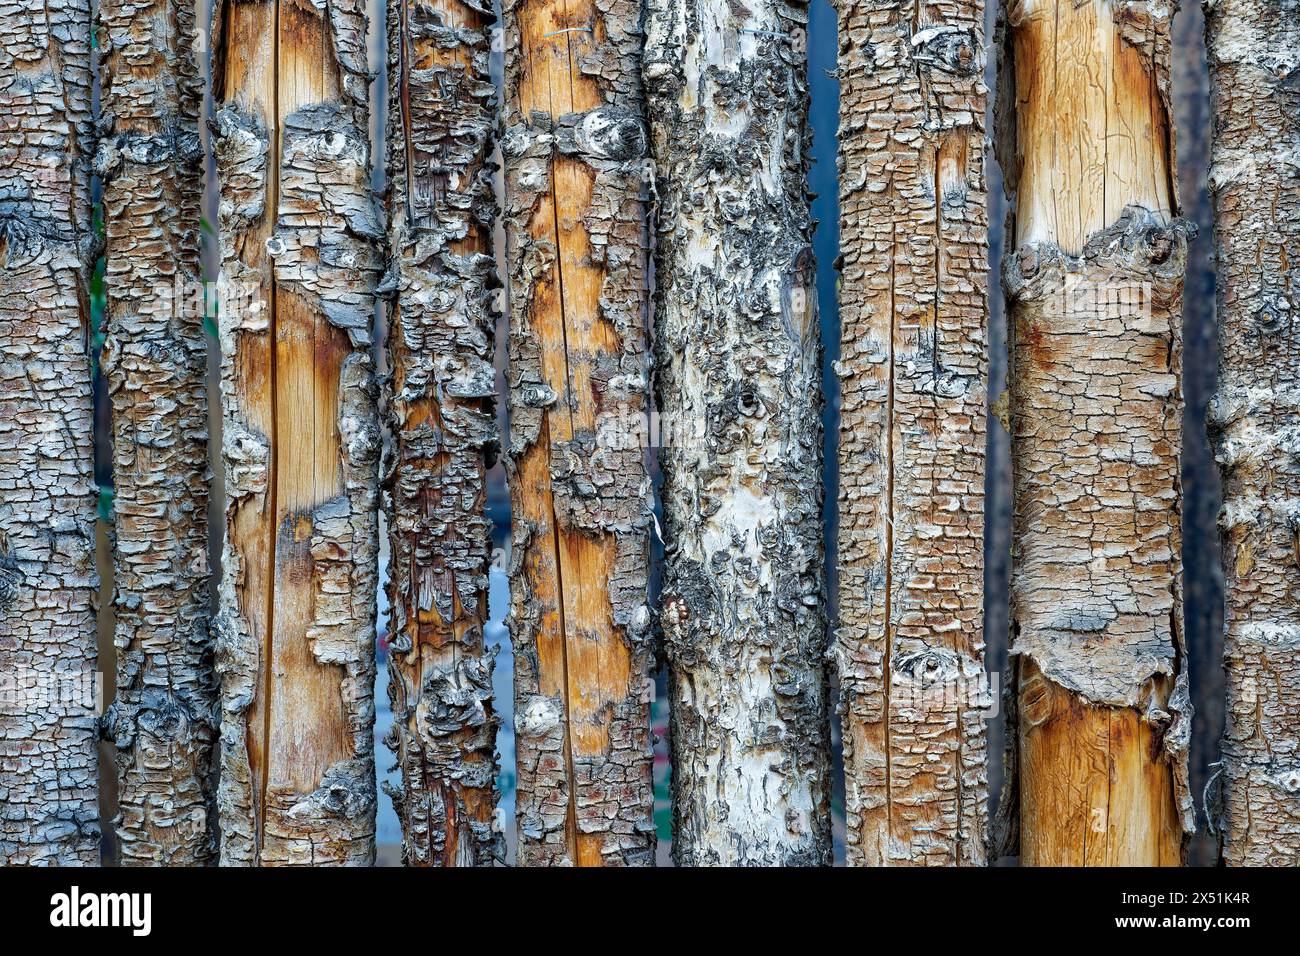 high texture background of a fence made of weathered tree trunks with peeling bark Stock Photo